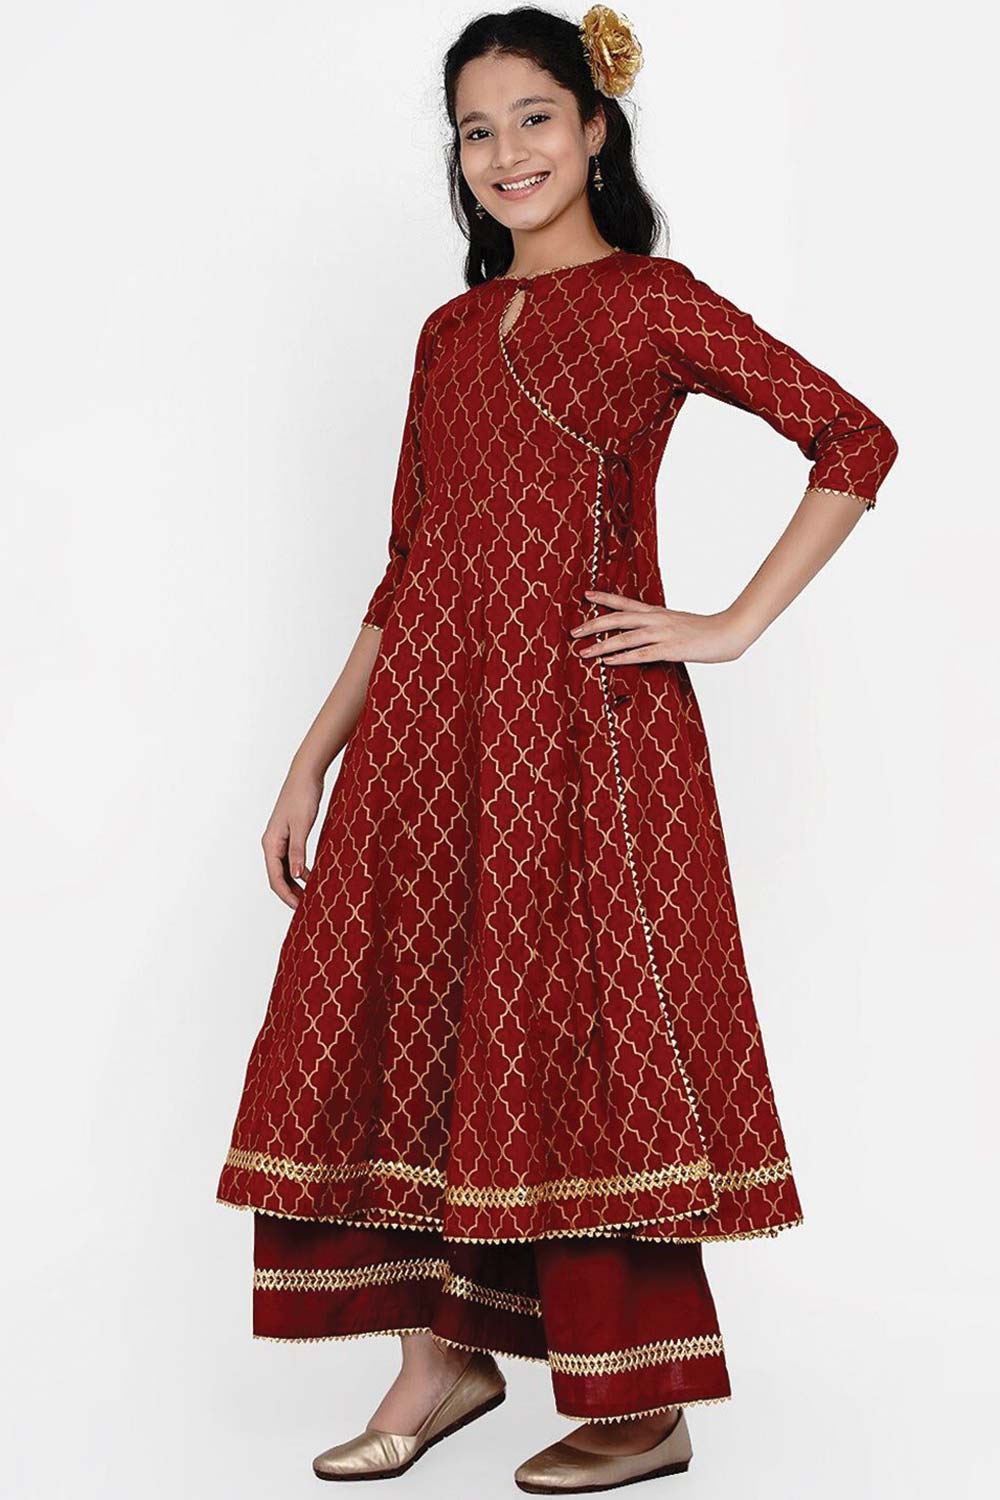 Buy Girl's Maroon And Gold Ethnic Motifs Foil Print Anarkali Kurta With Palazzos Online - Side